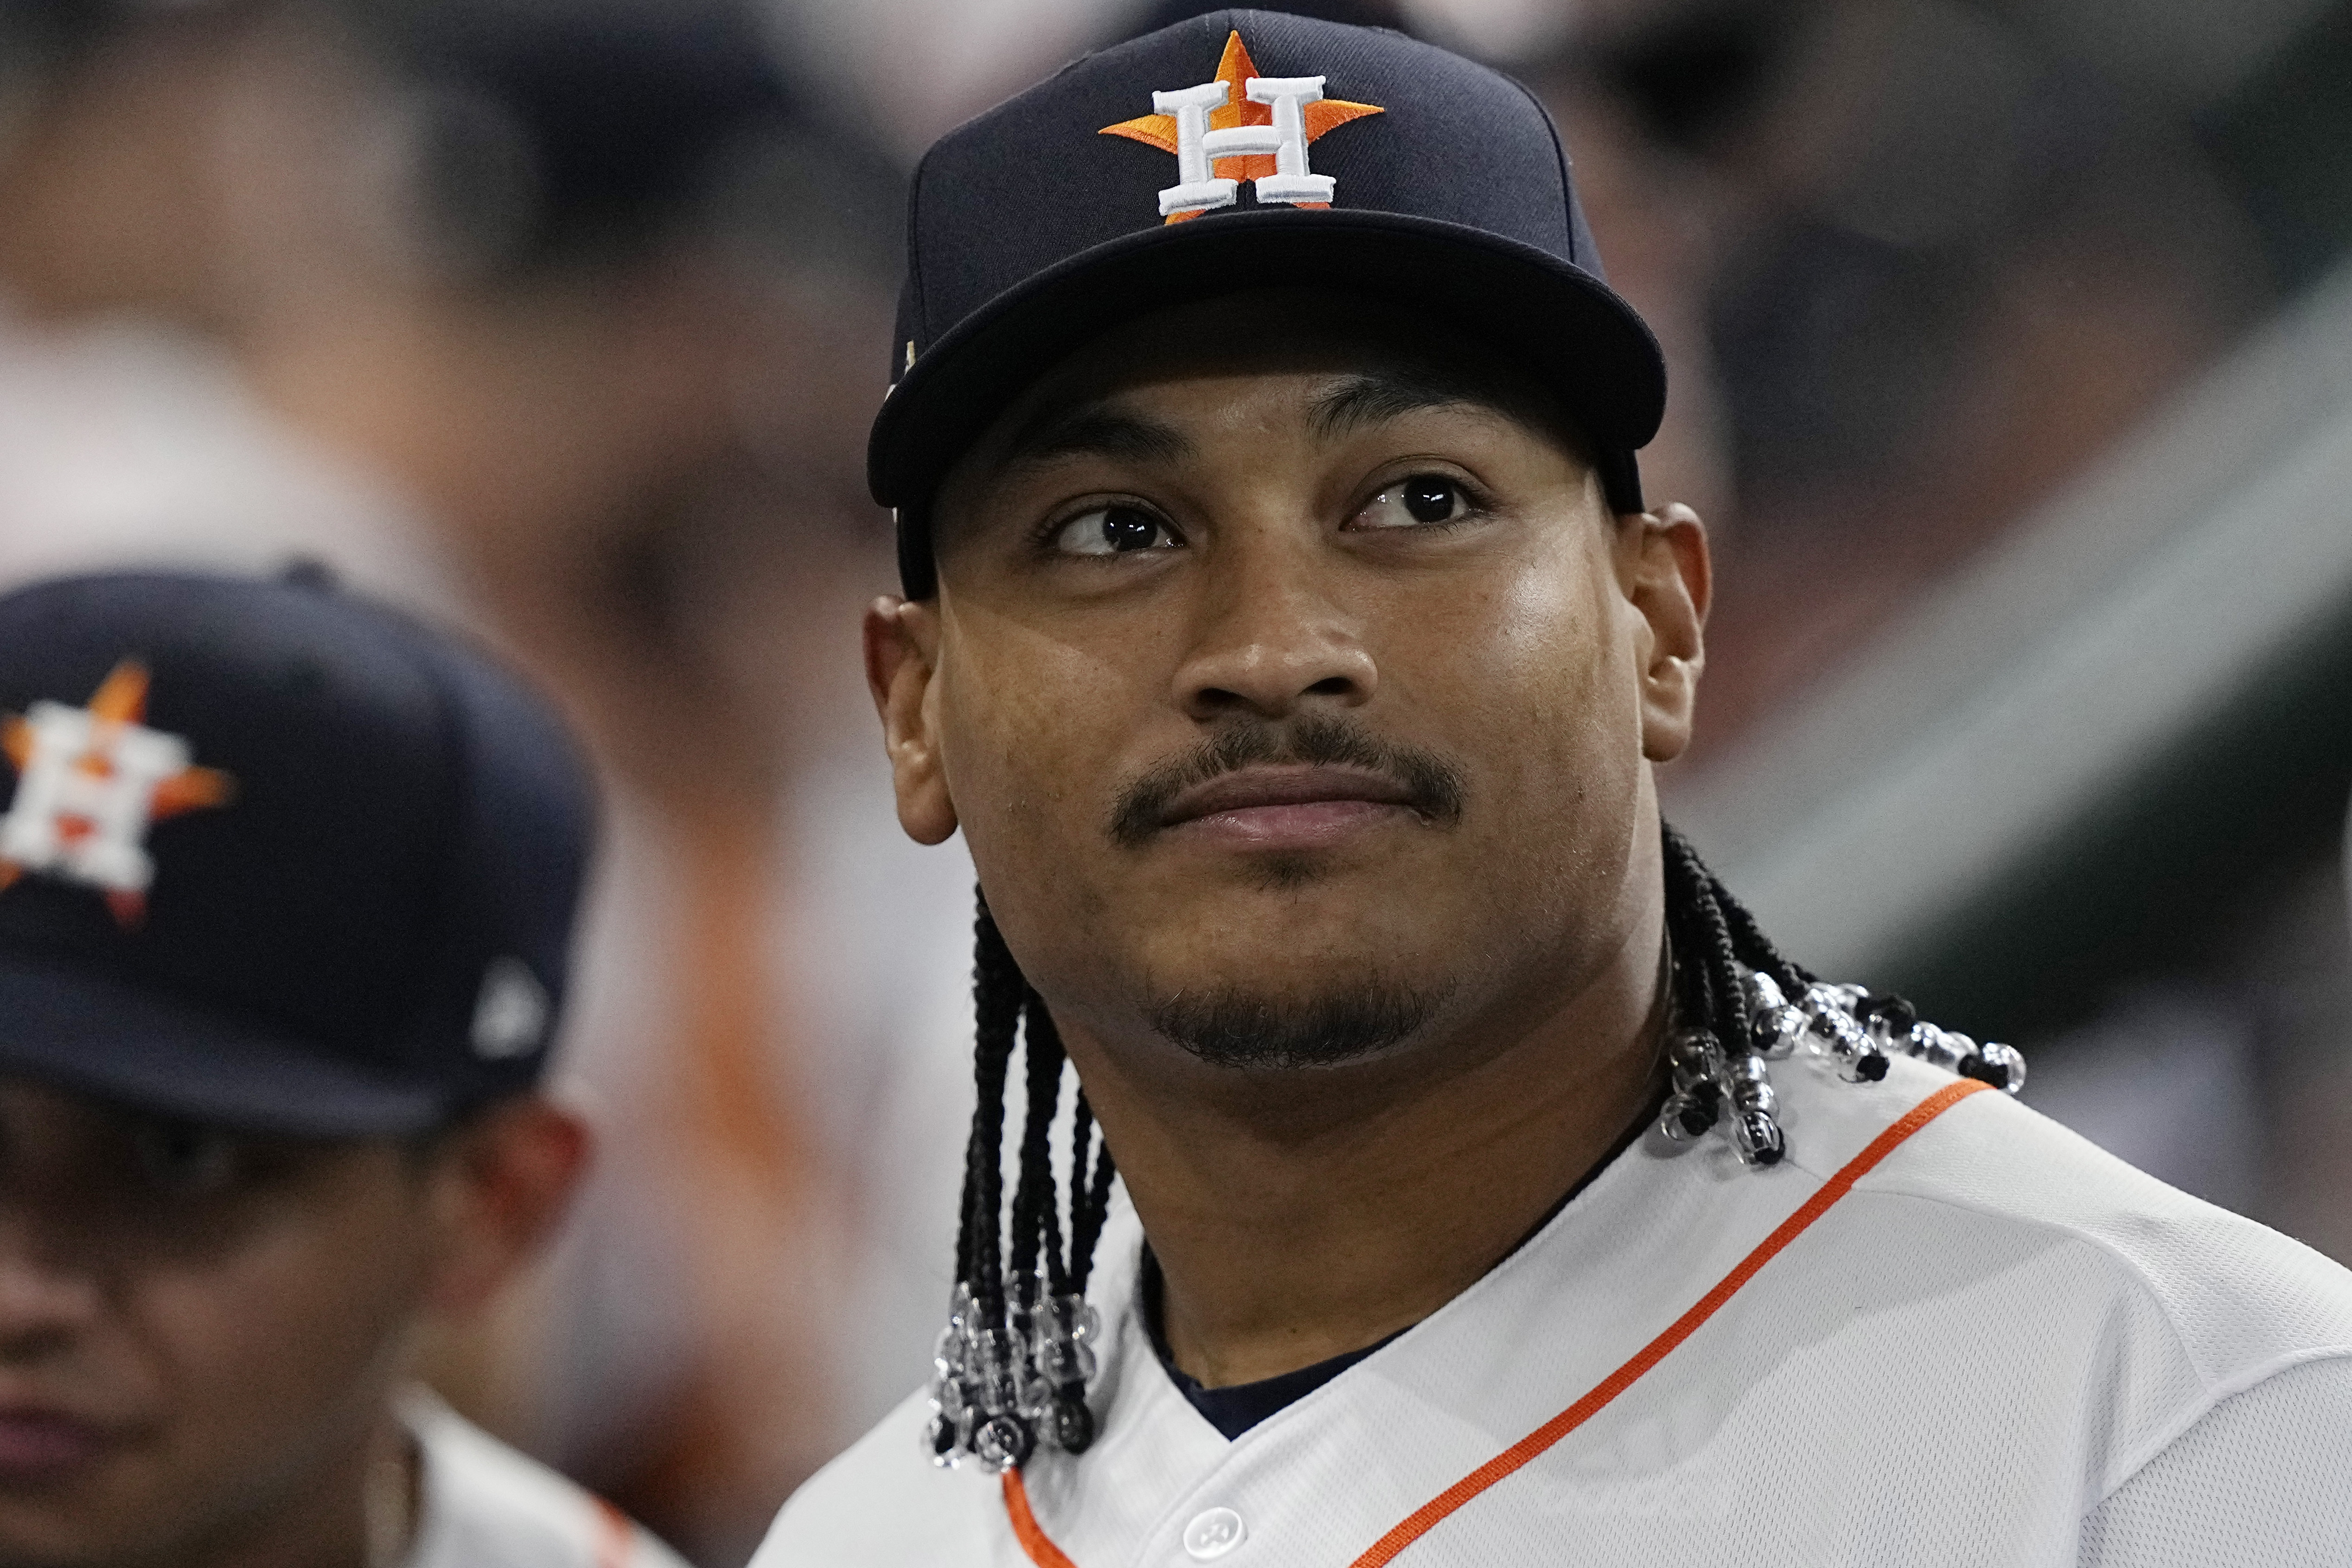 Local stylist critiques Astros' hairstyles